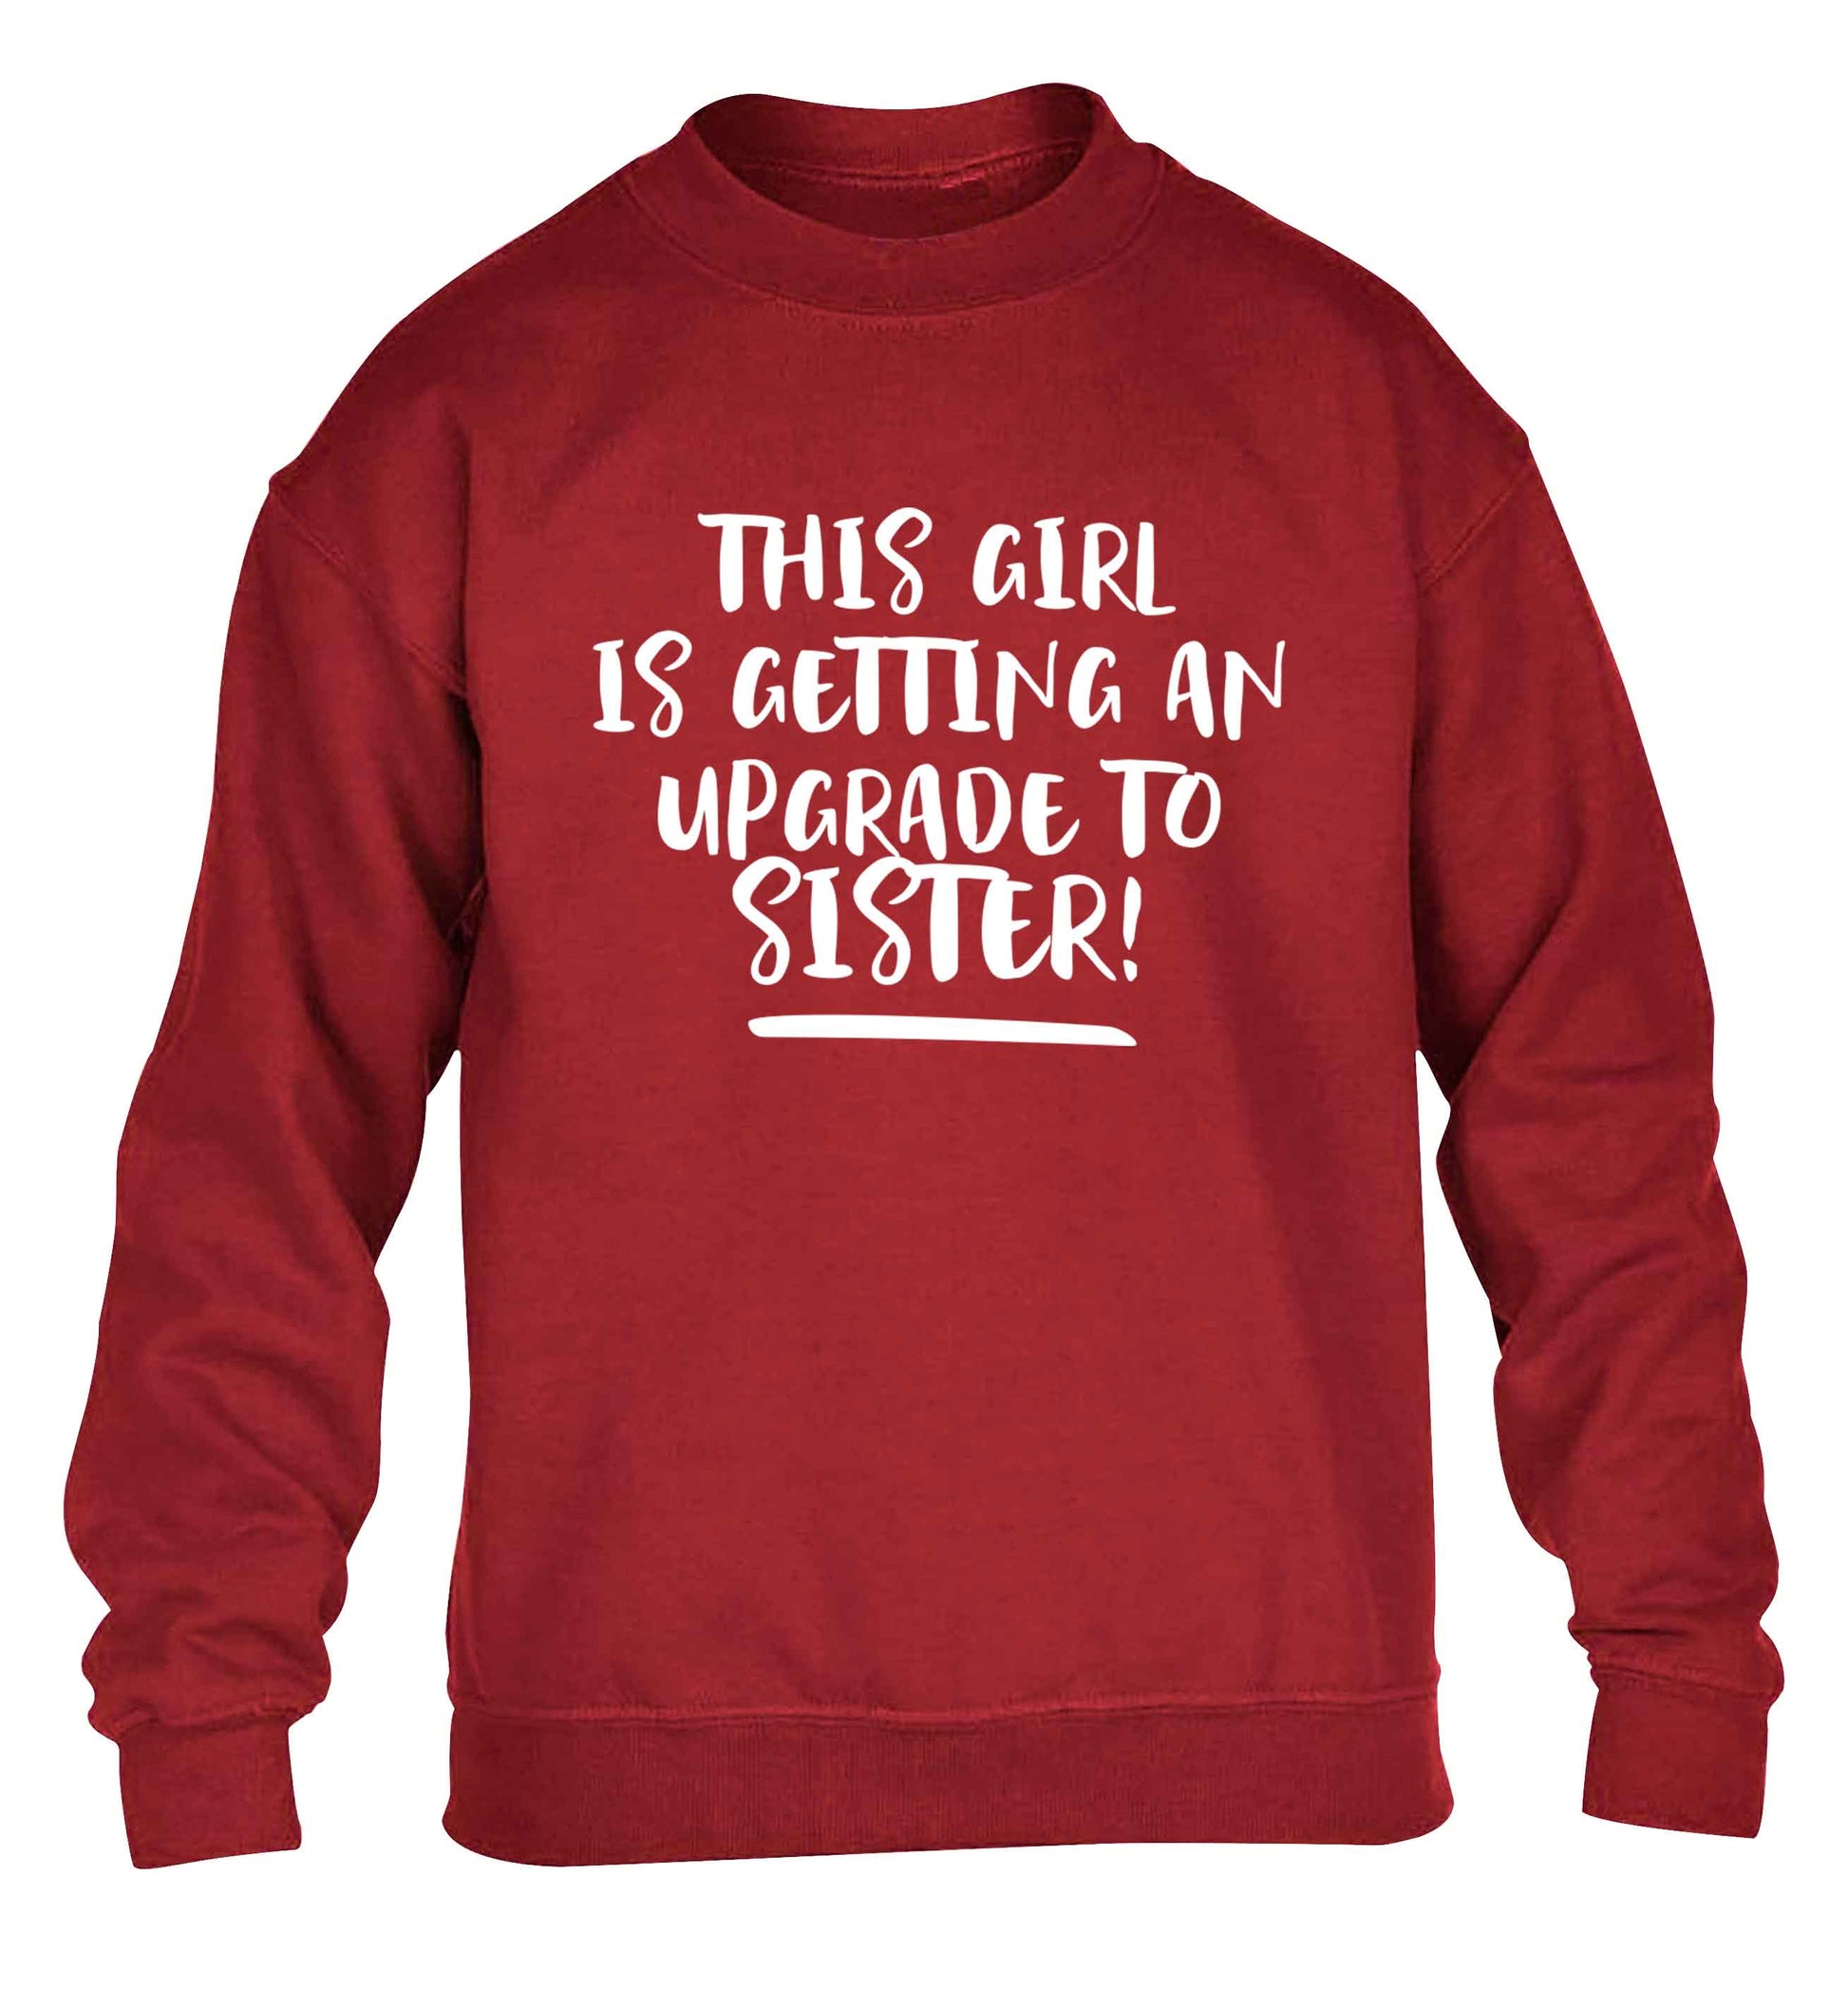 This girl is getting an upgrade to sister! children's grey sweater 12-13 Years